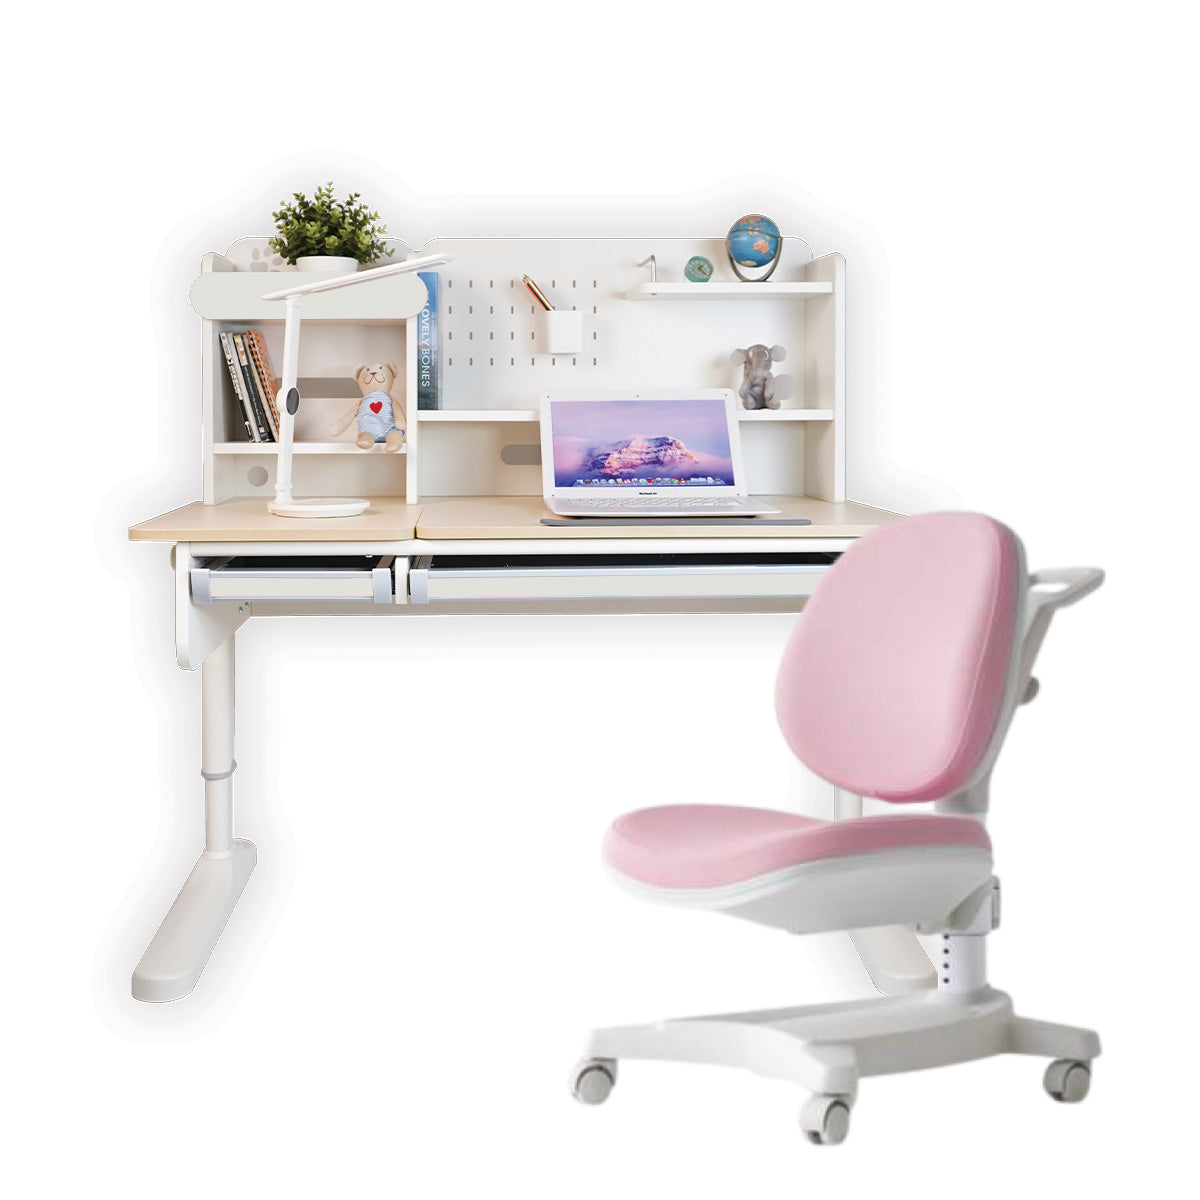 Impact Ergo-Growing Study Desk And Chair Set 1200mm x 650mm, IM-G1200A-GY (Ready Stock)